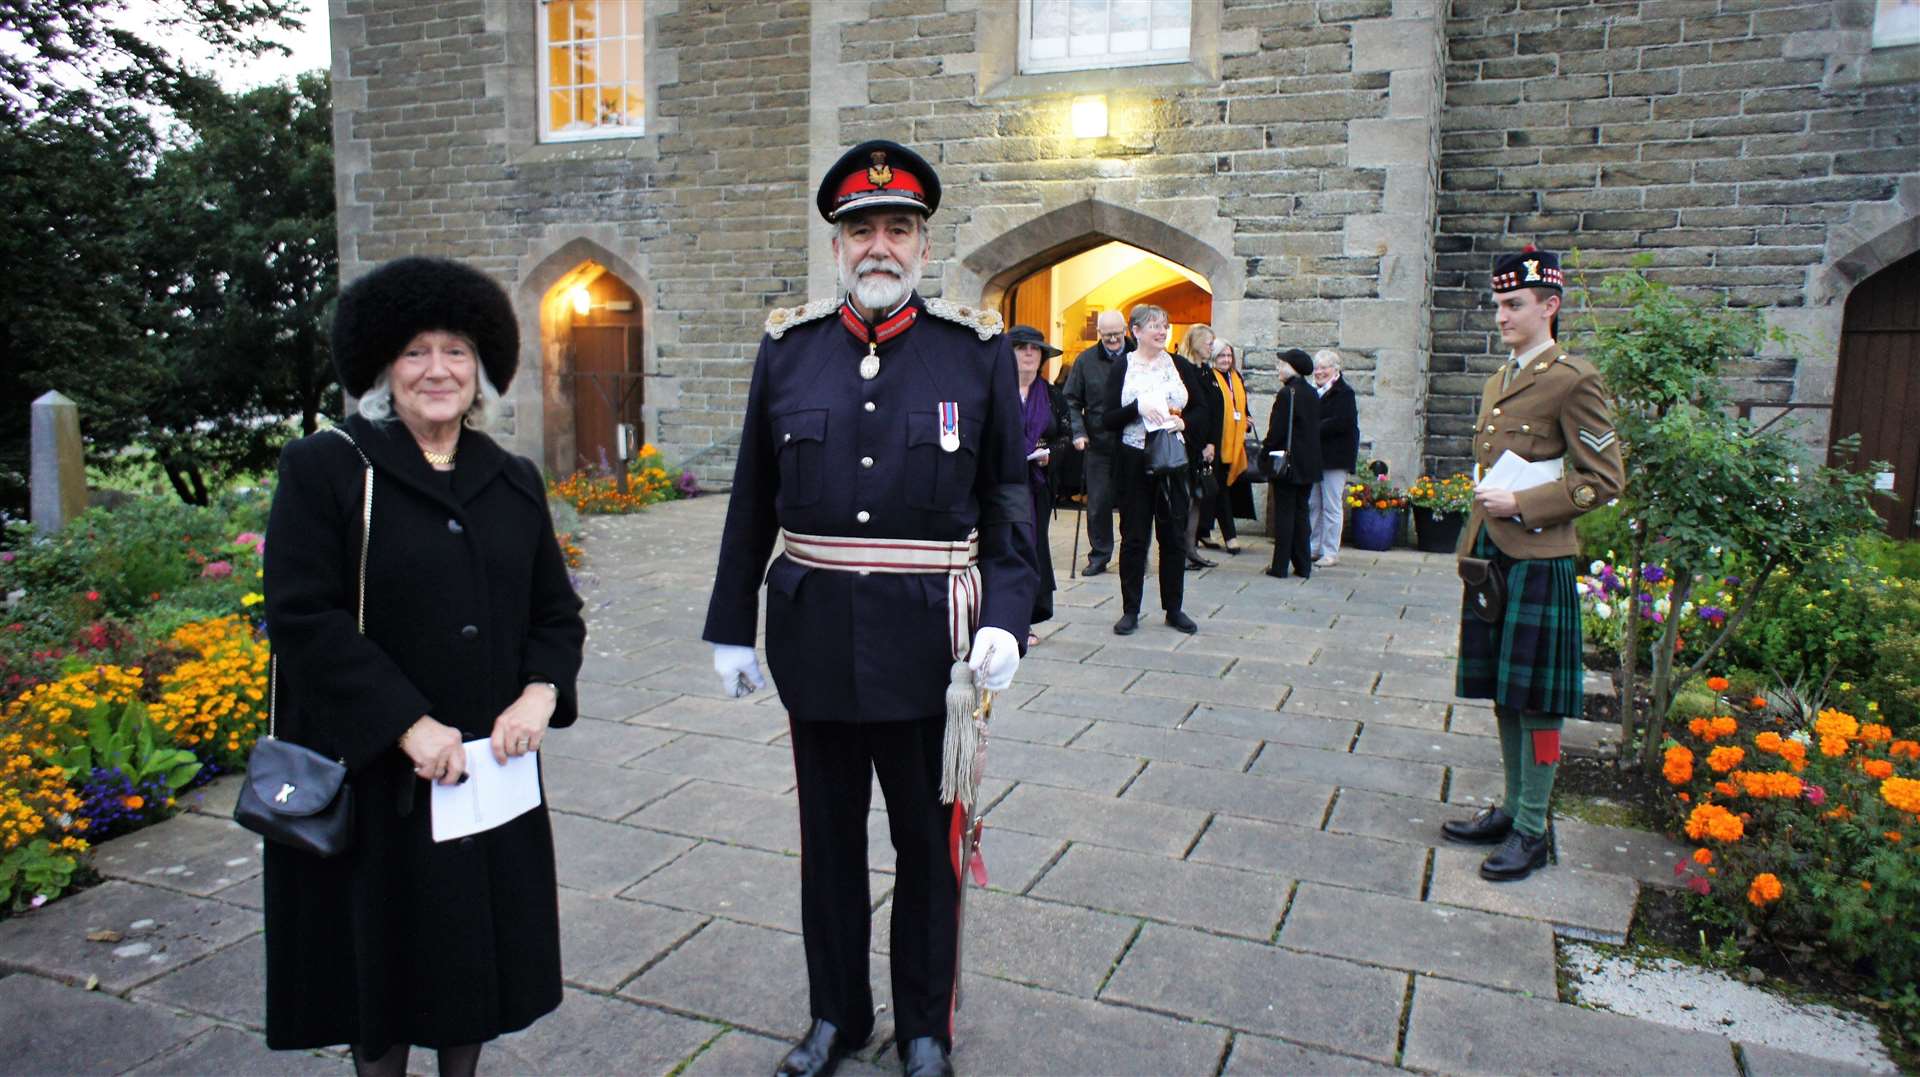 Lord and Lady Thurso after the event with Corporal Callum Prideaux from the Army Cadet Force at right. Picture: DGS